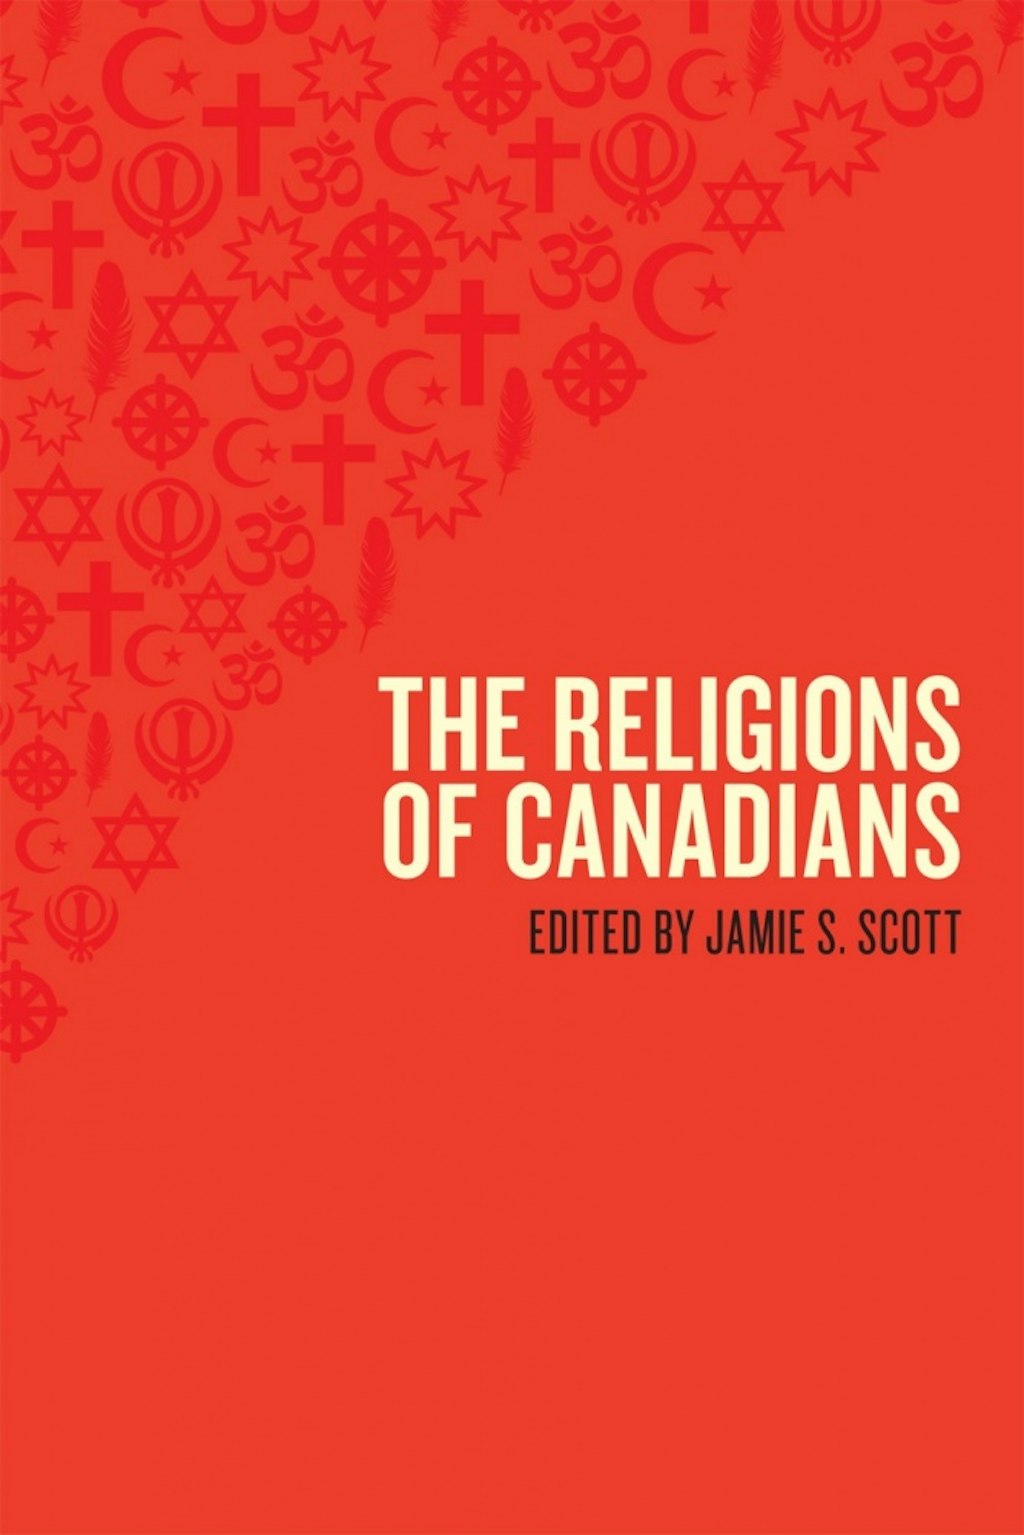 New book on Canada’s religions includes chapter on the Baha’i experience